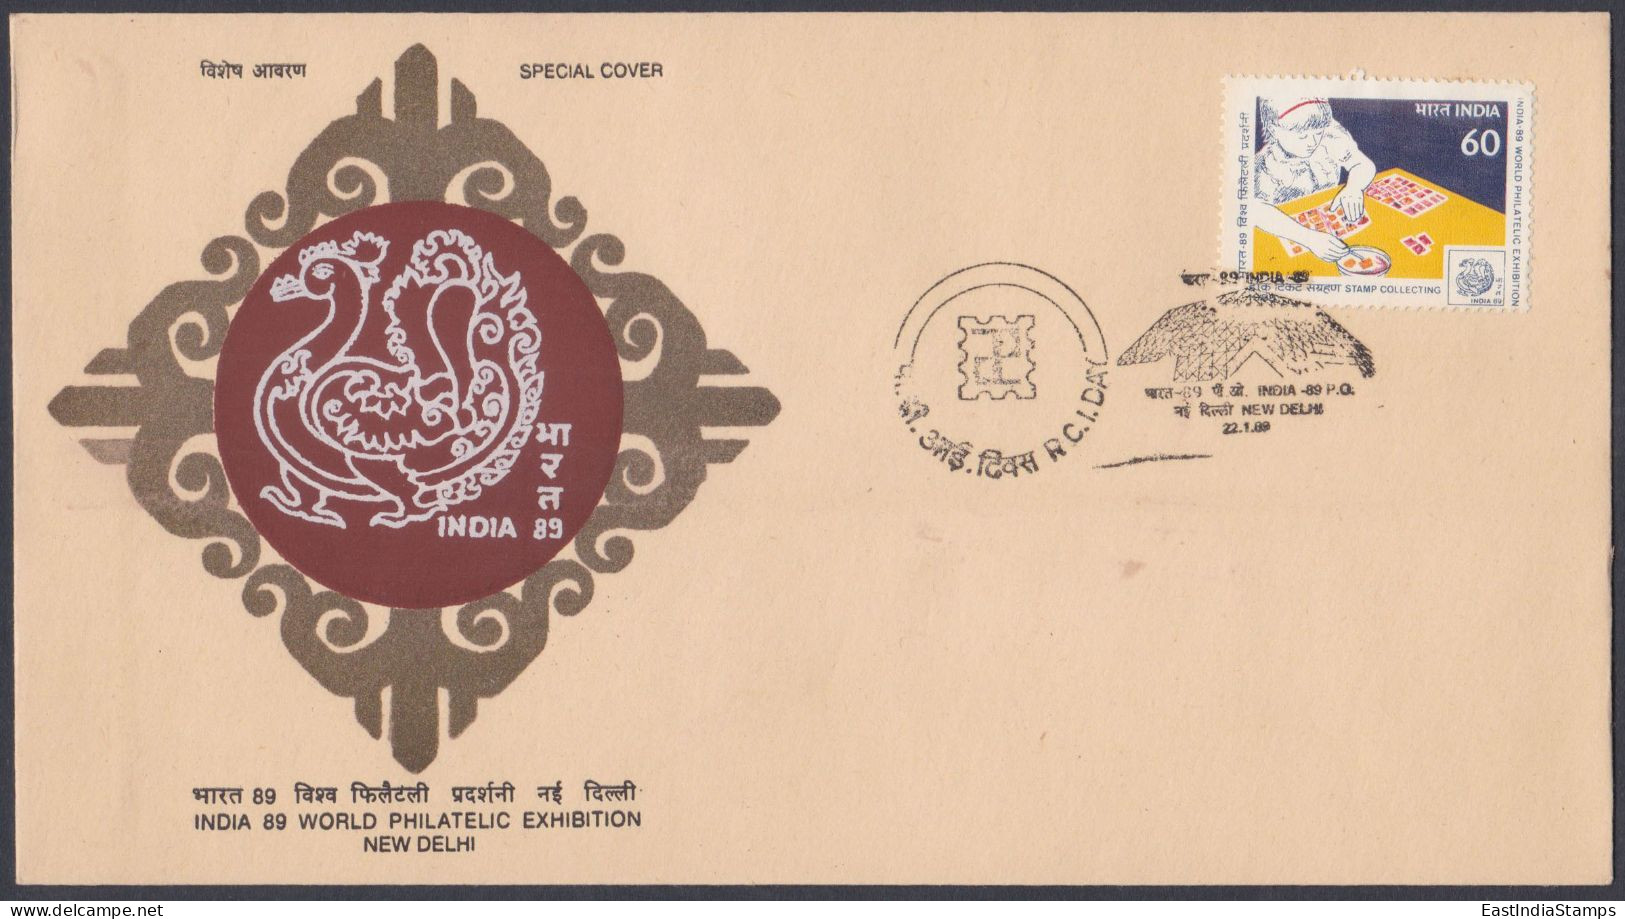 Inde India 1989 Special Cover World Philatelic Exhibition, Peacock, Bird, Birds, Philately Day, Pictorial Postmark - Lettres & Documents